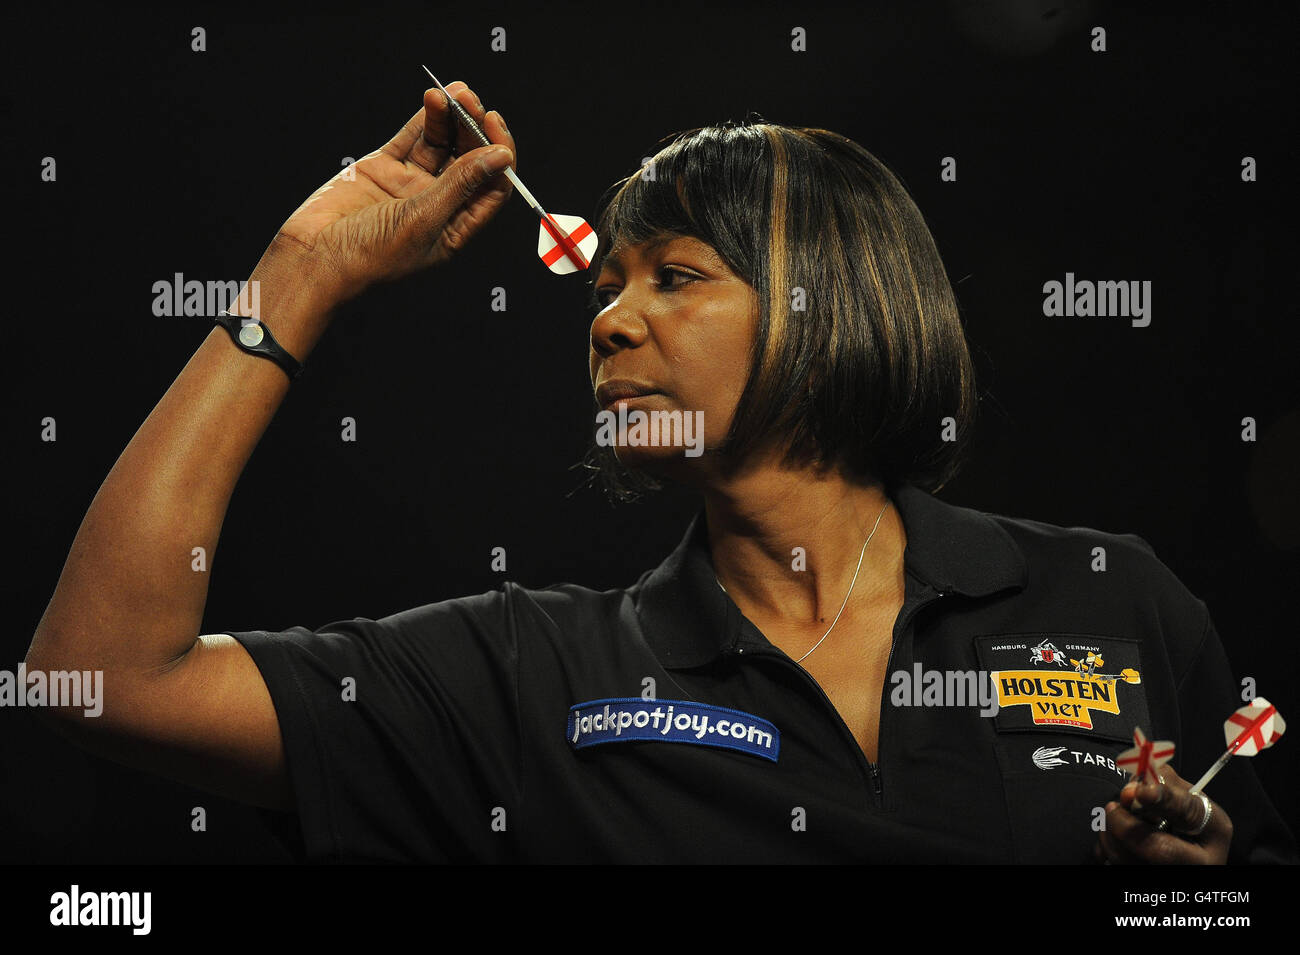 England's Deta Hedman in action in the Semi Final during the BDO World Professional Darts Championships at the Lakeside Complex, Surrey. Stock Photo